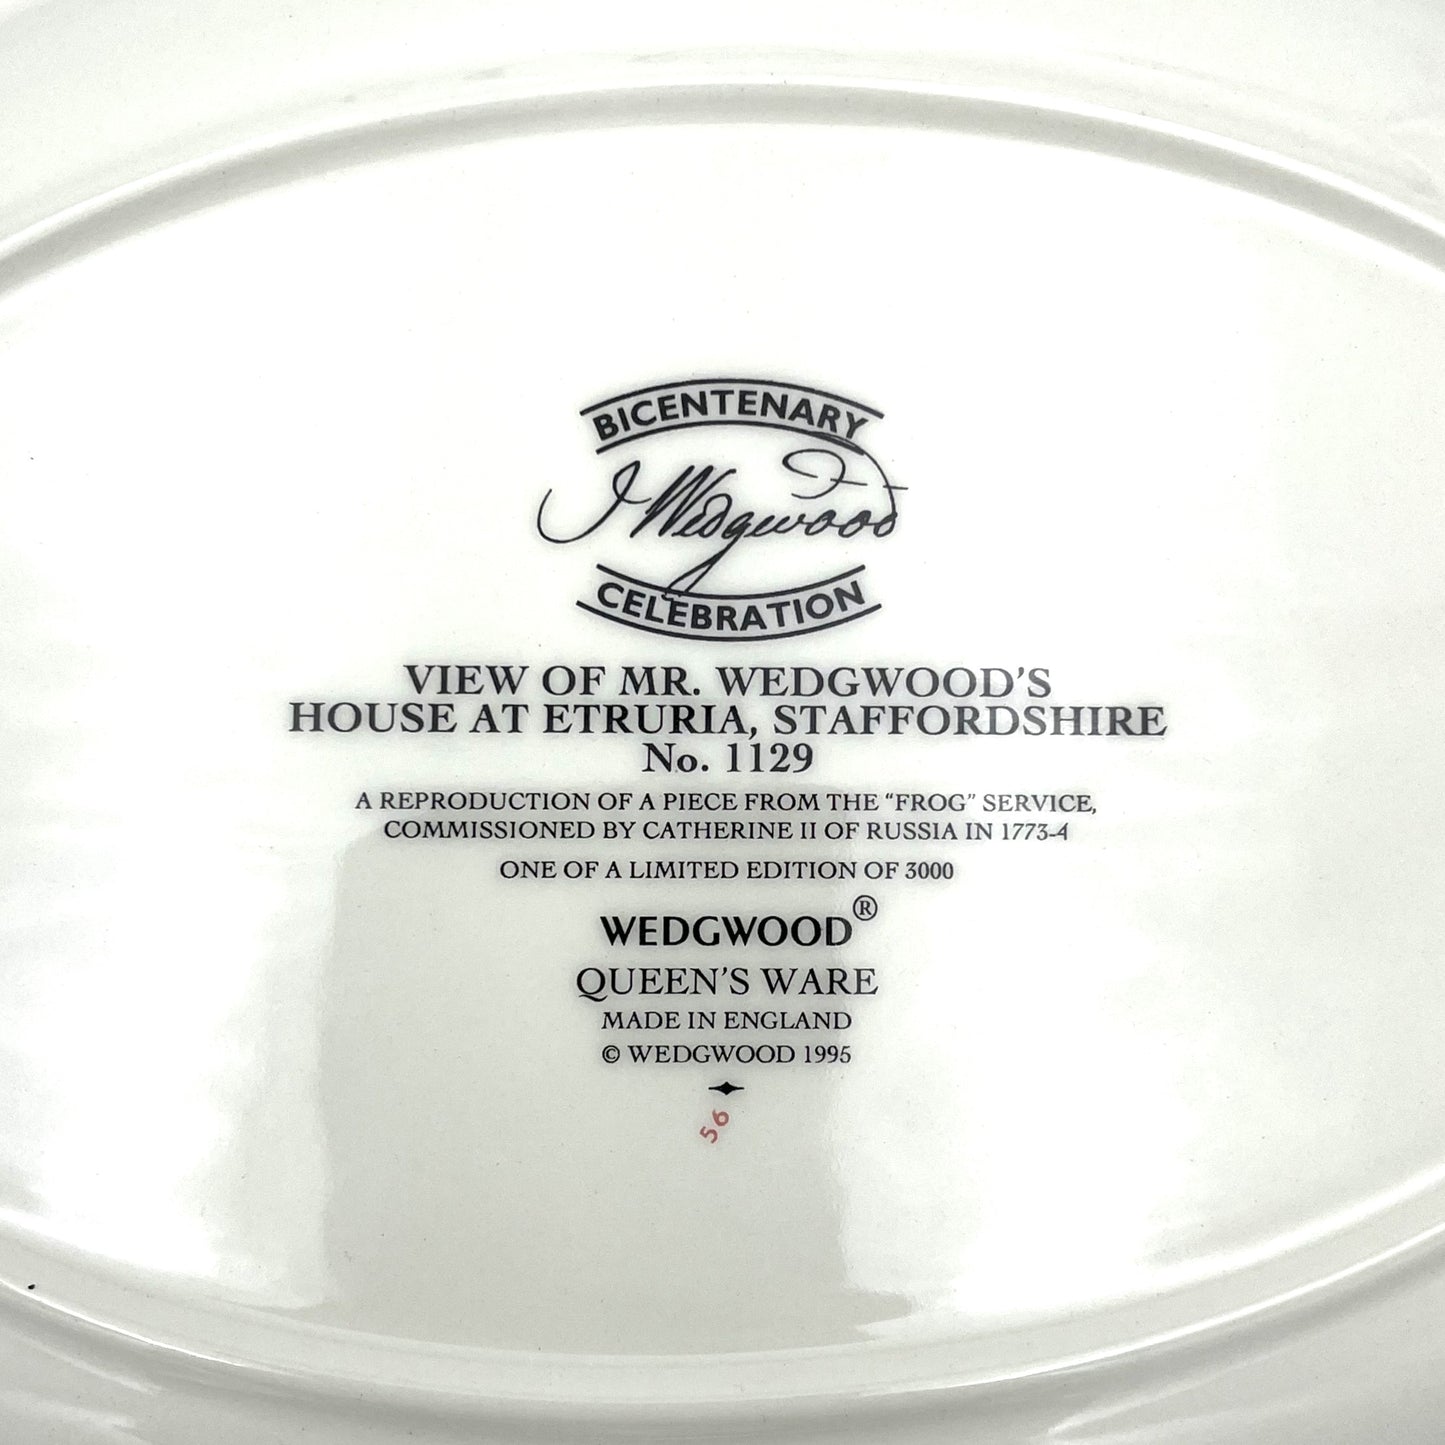 Rare Wedgwood Bicentenary Celebration Queen's Ware Frog Service 12" Oval Plate